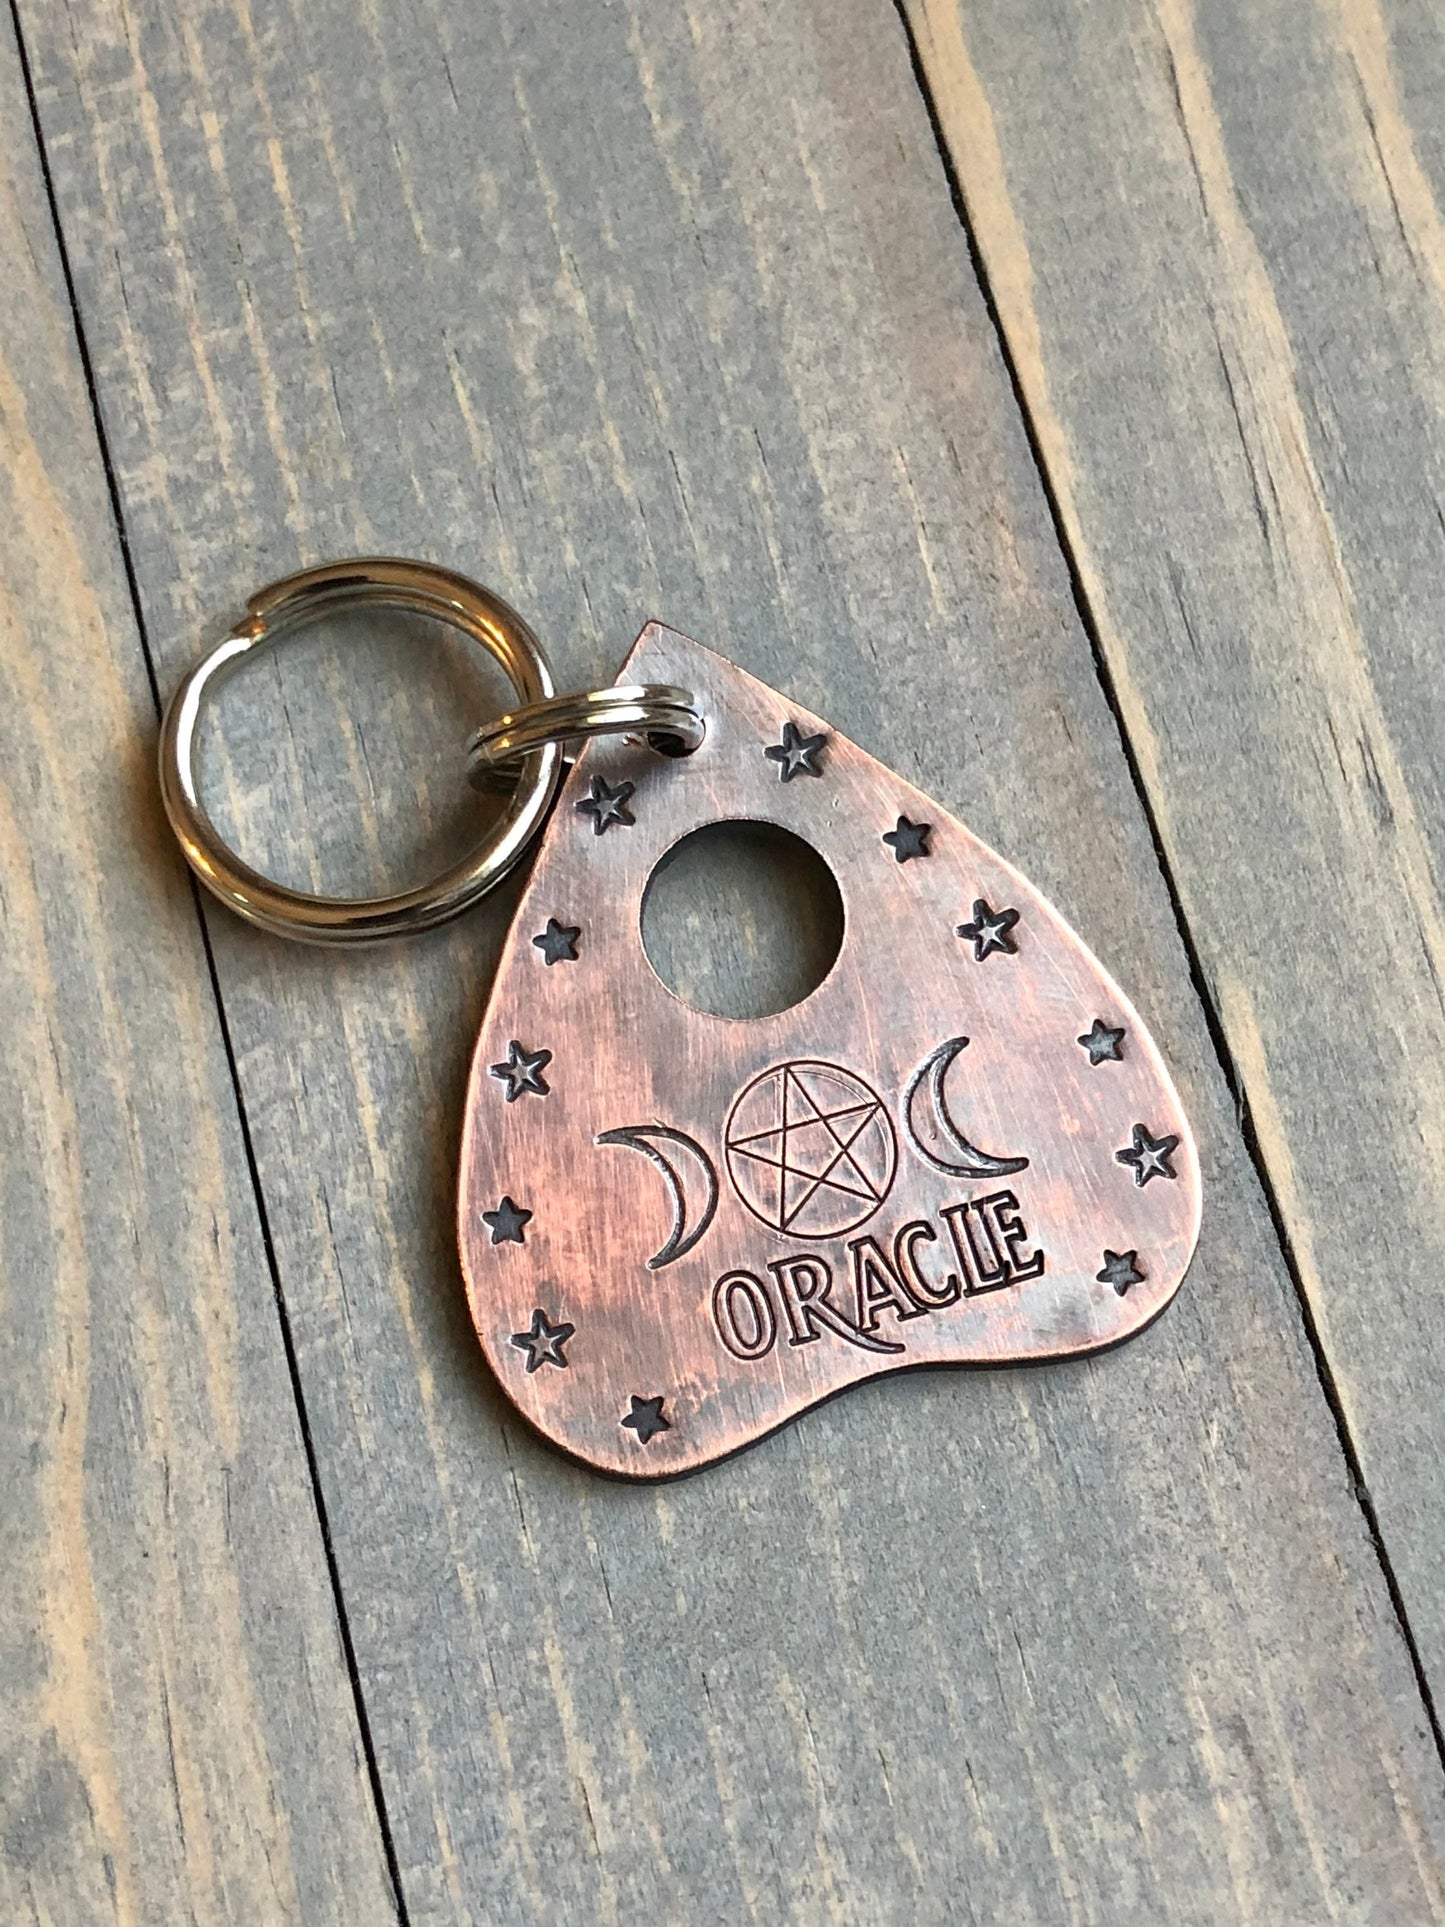 Planchette Dog Tag, Hand Stamped, Personalized Dog Tag for Dog, Halloween Collar Tag, Tag with Pentagram, Tag with Moon and Stars, Oracle